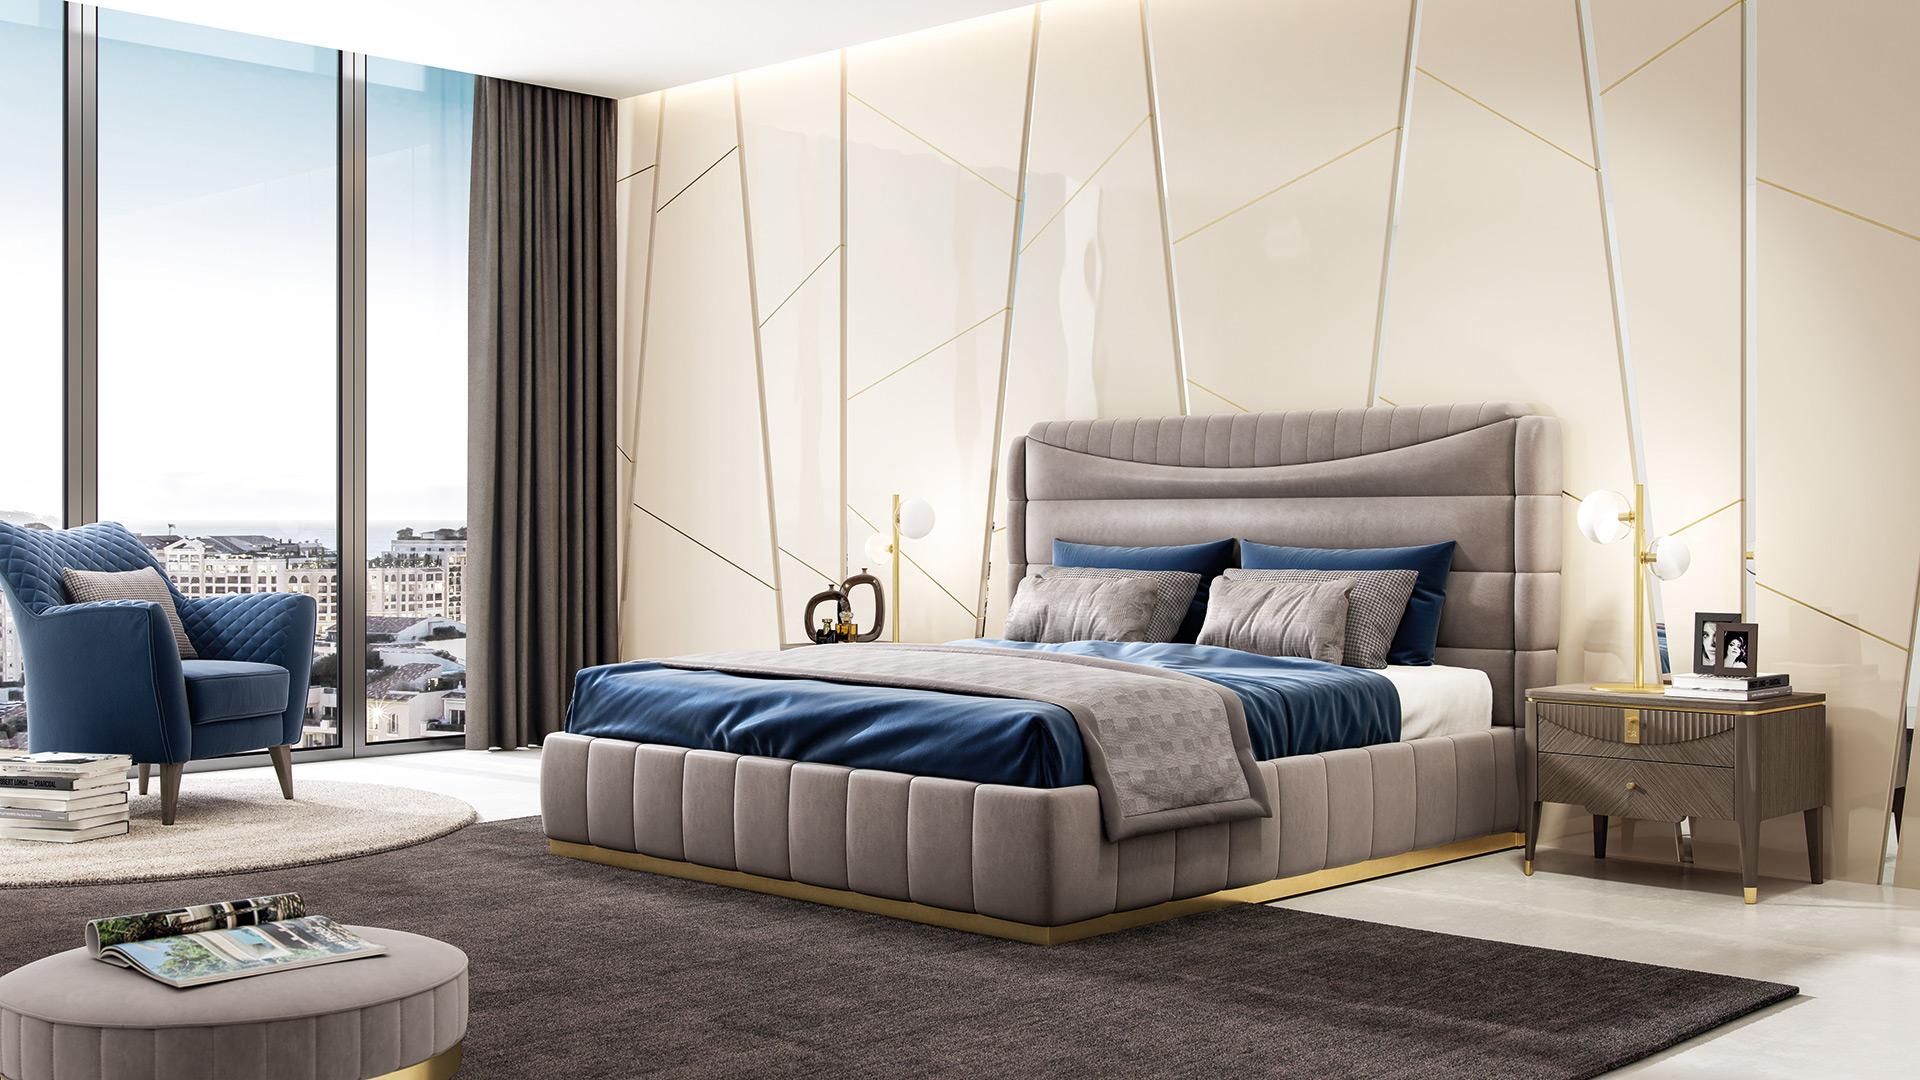 Padded bed. Mattress measures 180 x 200cm. Characterized by beautiful headboard with horizontal stitchings.
The sommier is upholstered with a metal golden finished base and enriched by vertical stitchings all around.
The upholstery is Econabuk